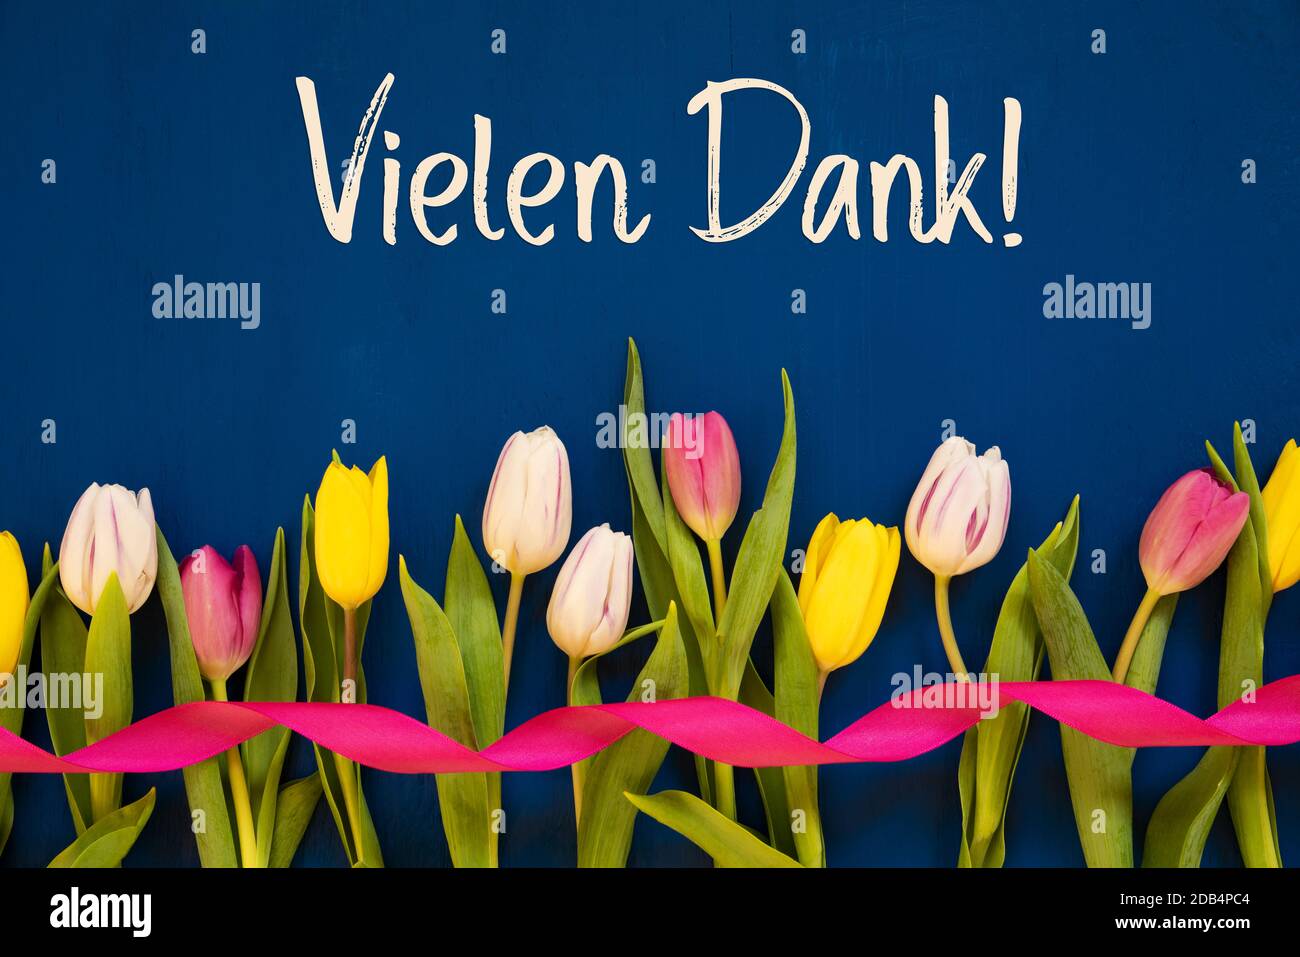 German Text Vielen Dank Means Thank You. White And Pink Tulip Spring Flowers With Ribbon. Blue Wooden Background Stock Photo